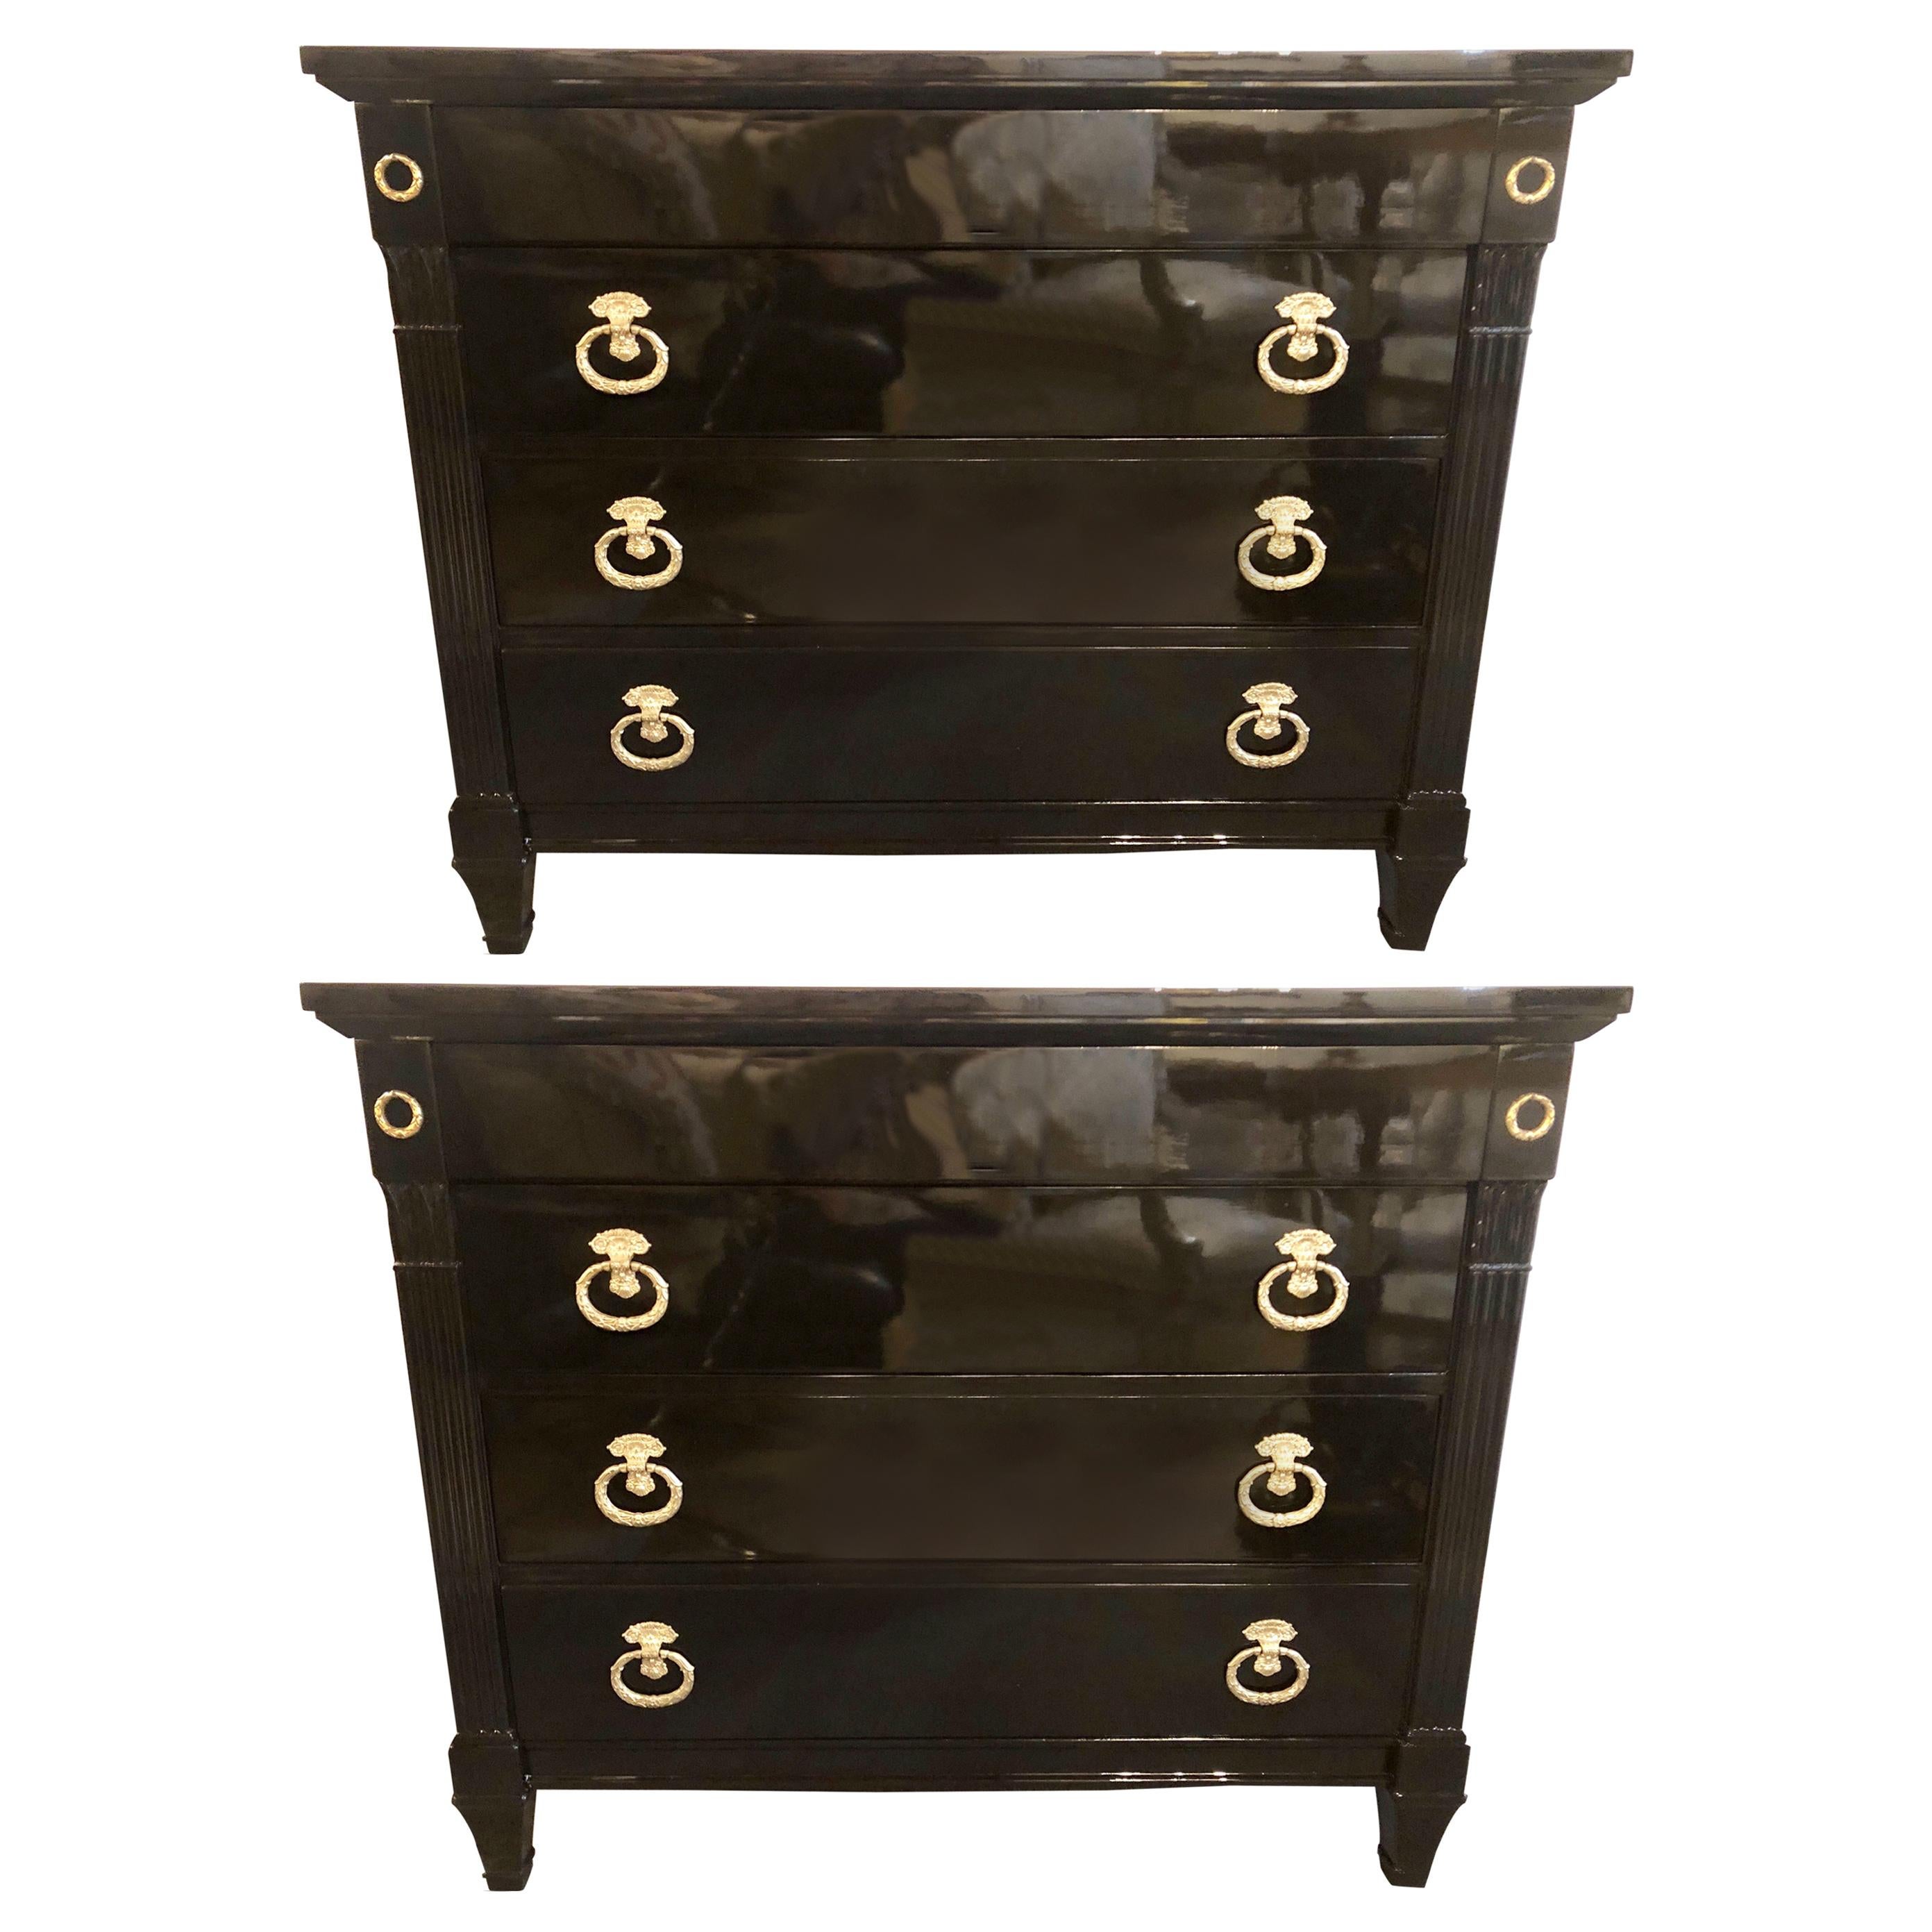 Pair of Jansen Style Hollywood Regency Ebony Commodes, Chests or Nightstands